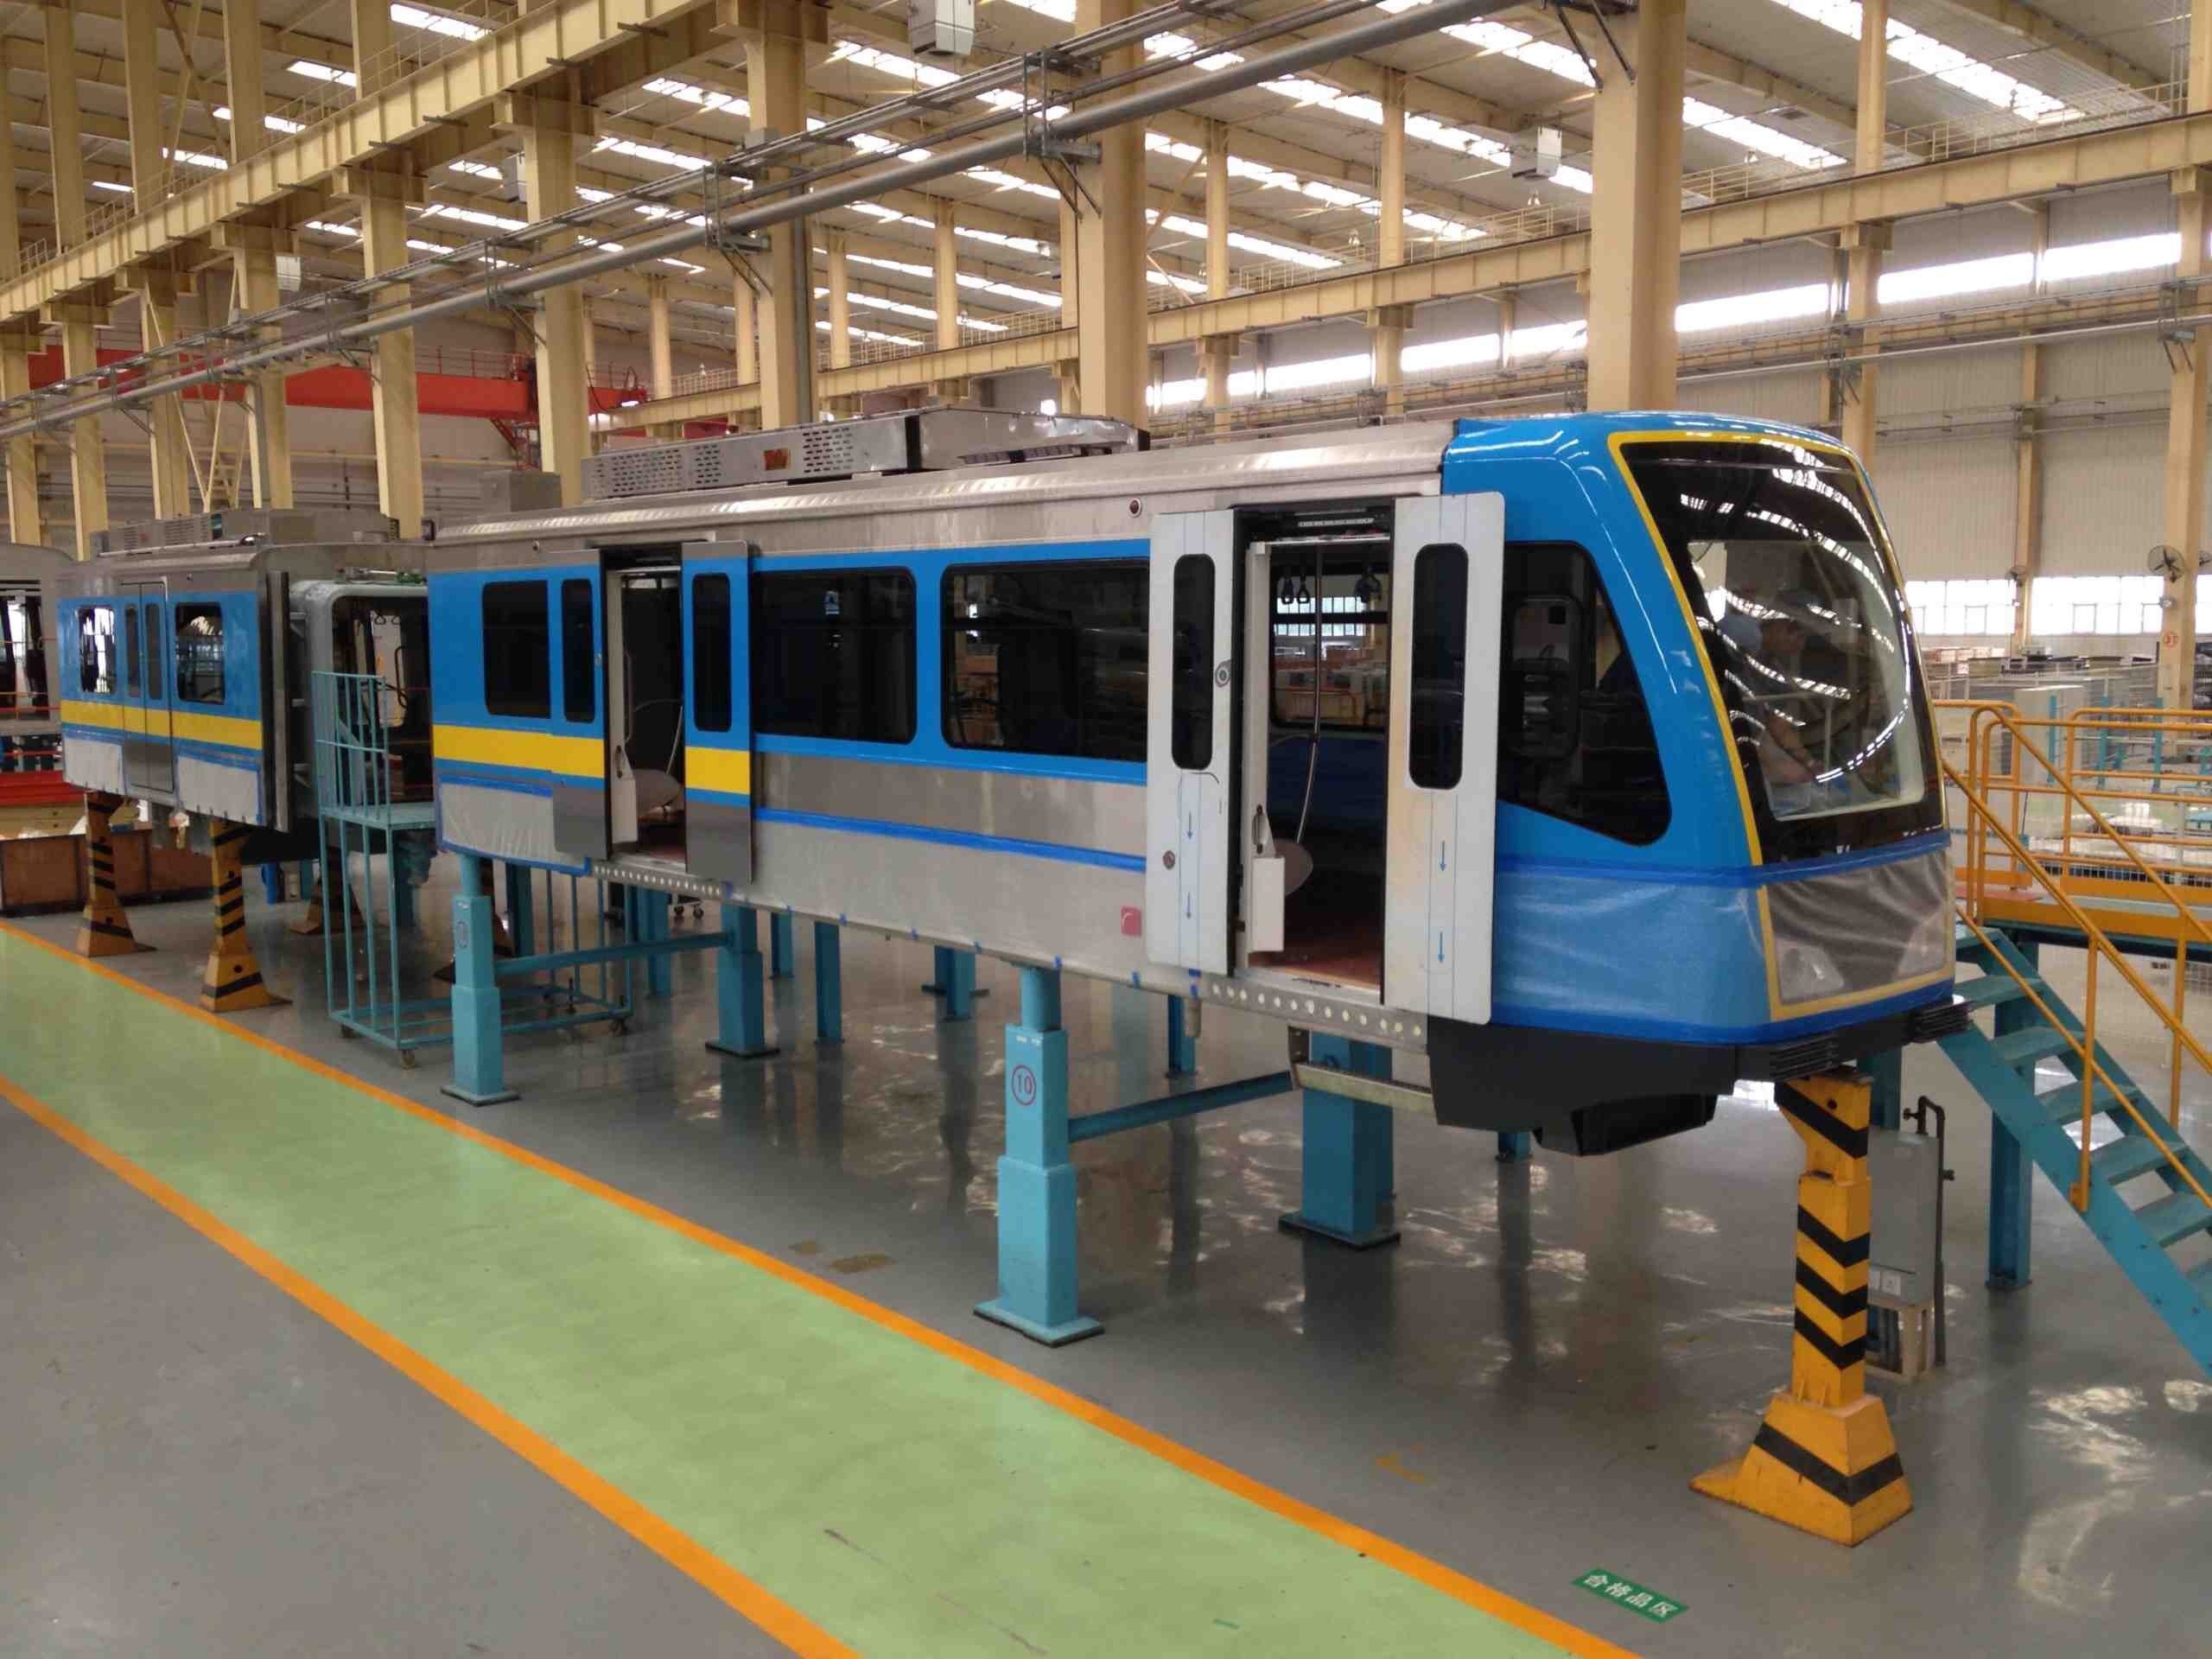 New MRT train expected to start running by end-March